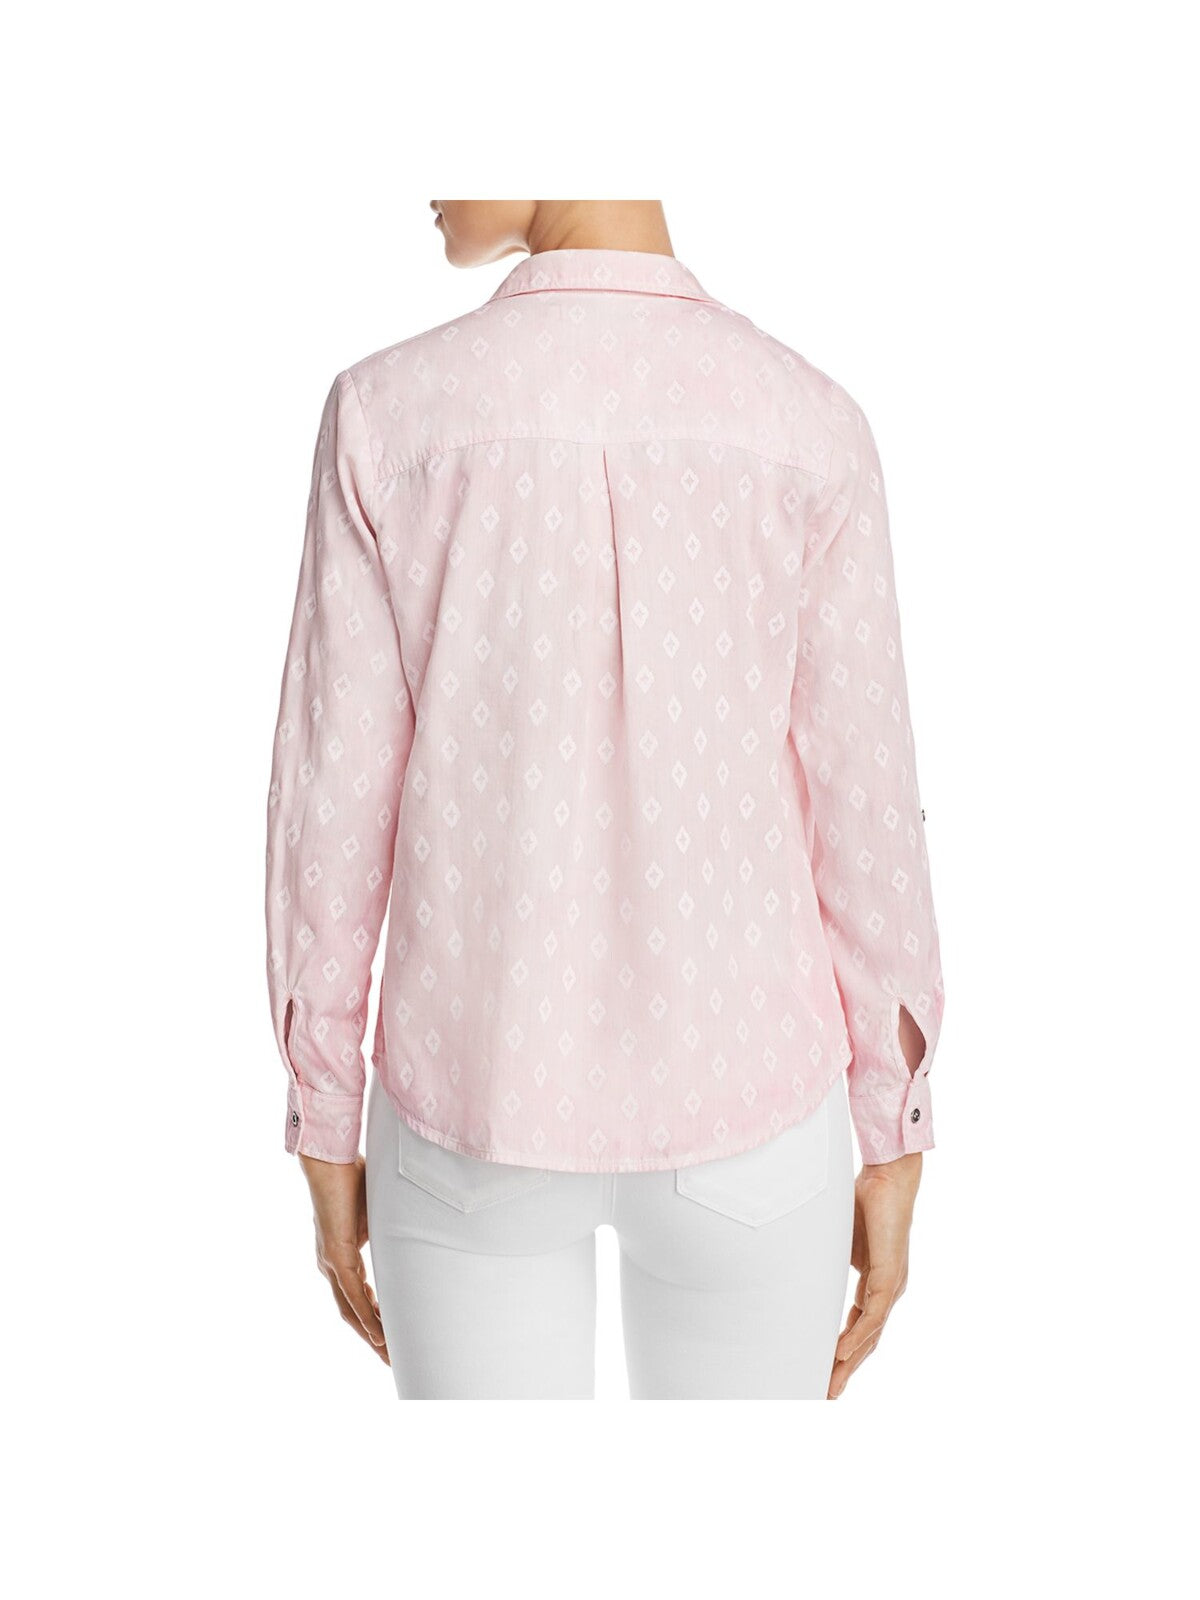 BILLY T Womens Pink Roll-tab Sleeve Collared Wear To Work Button Up Top M